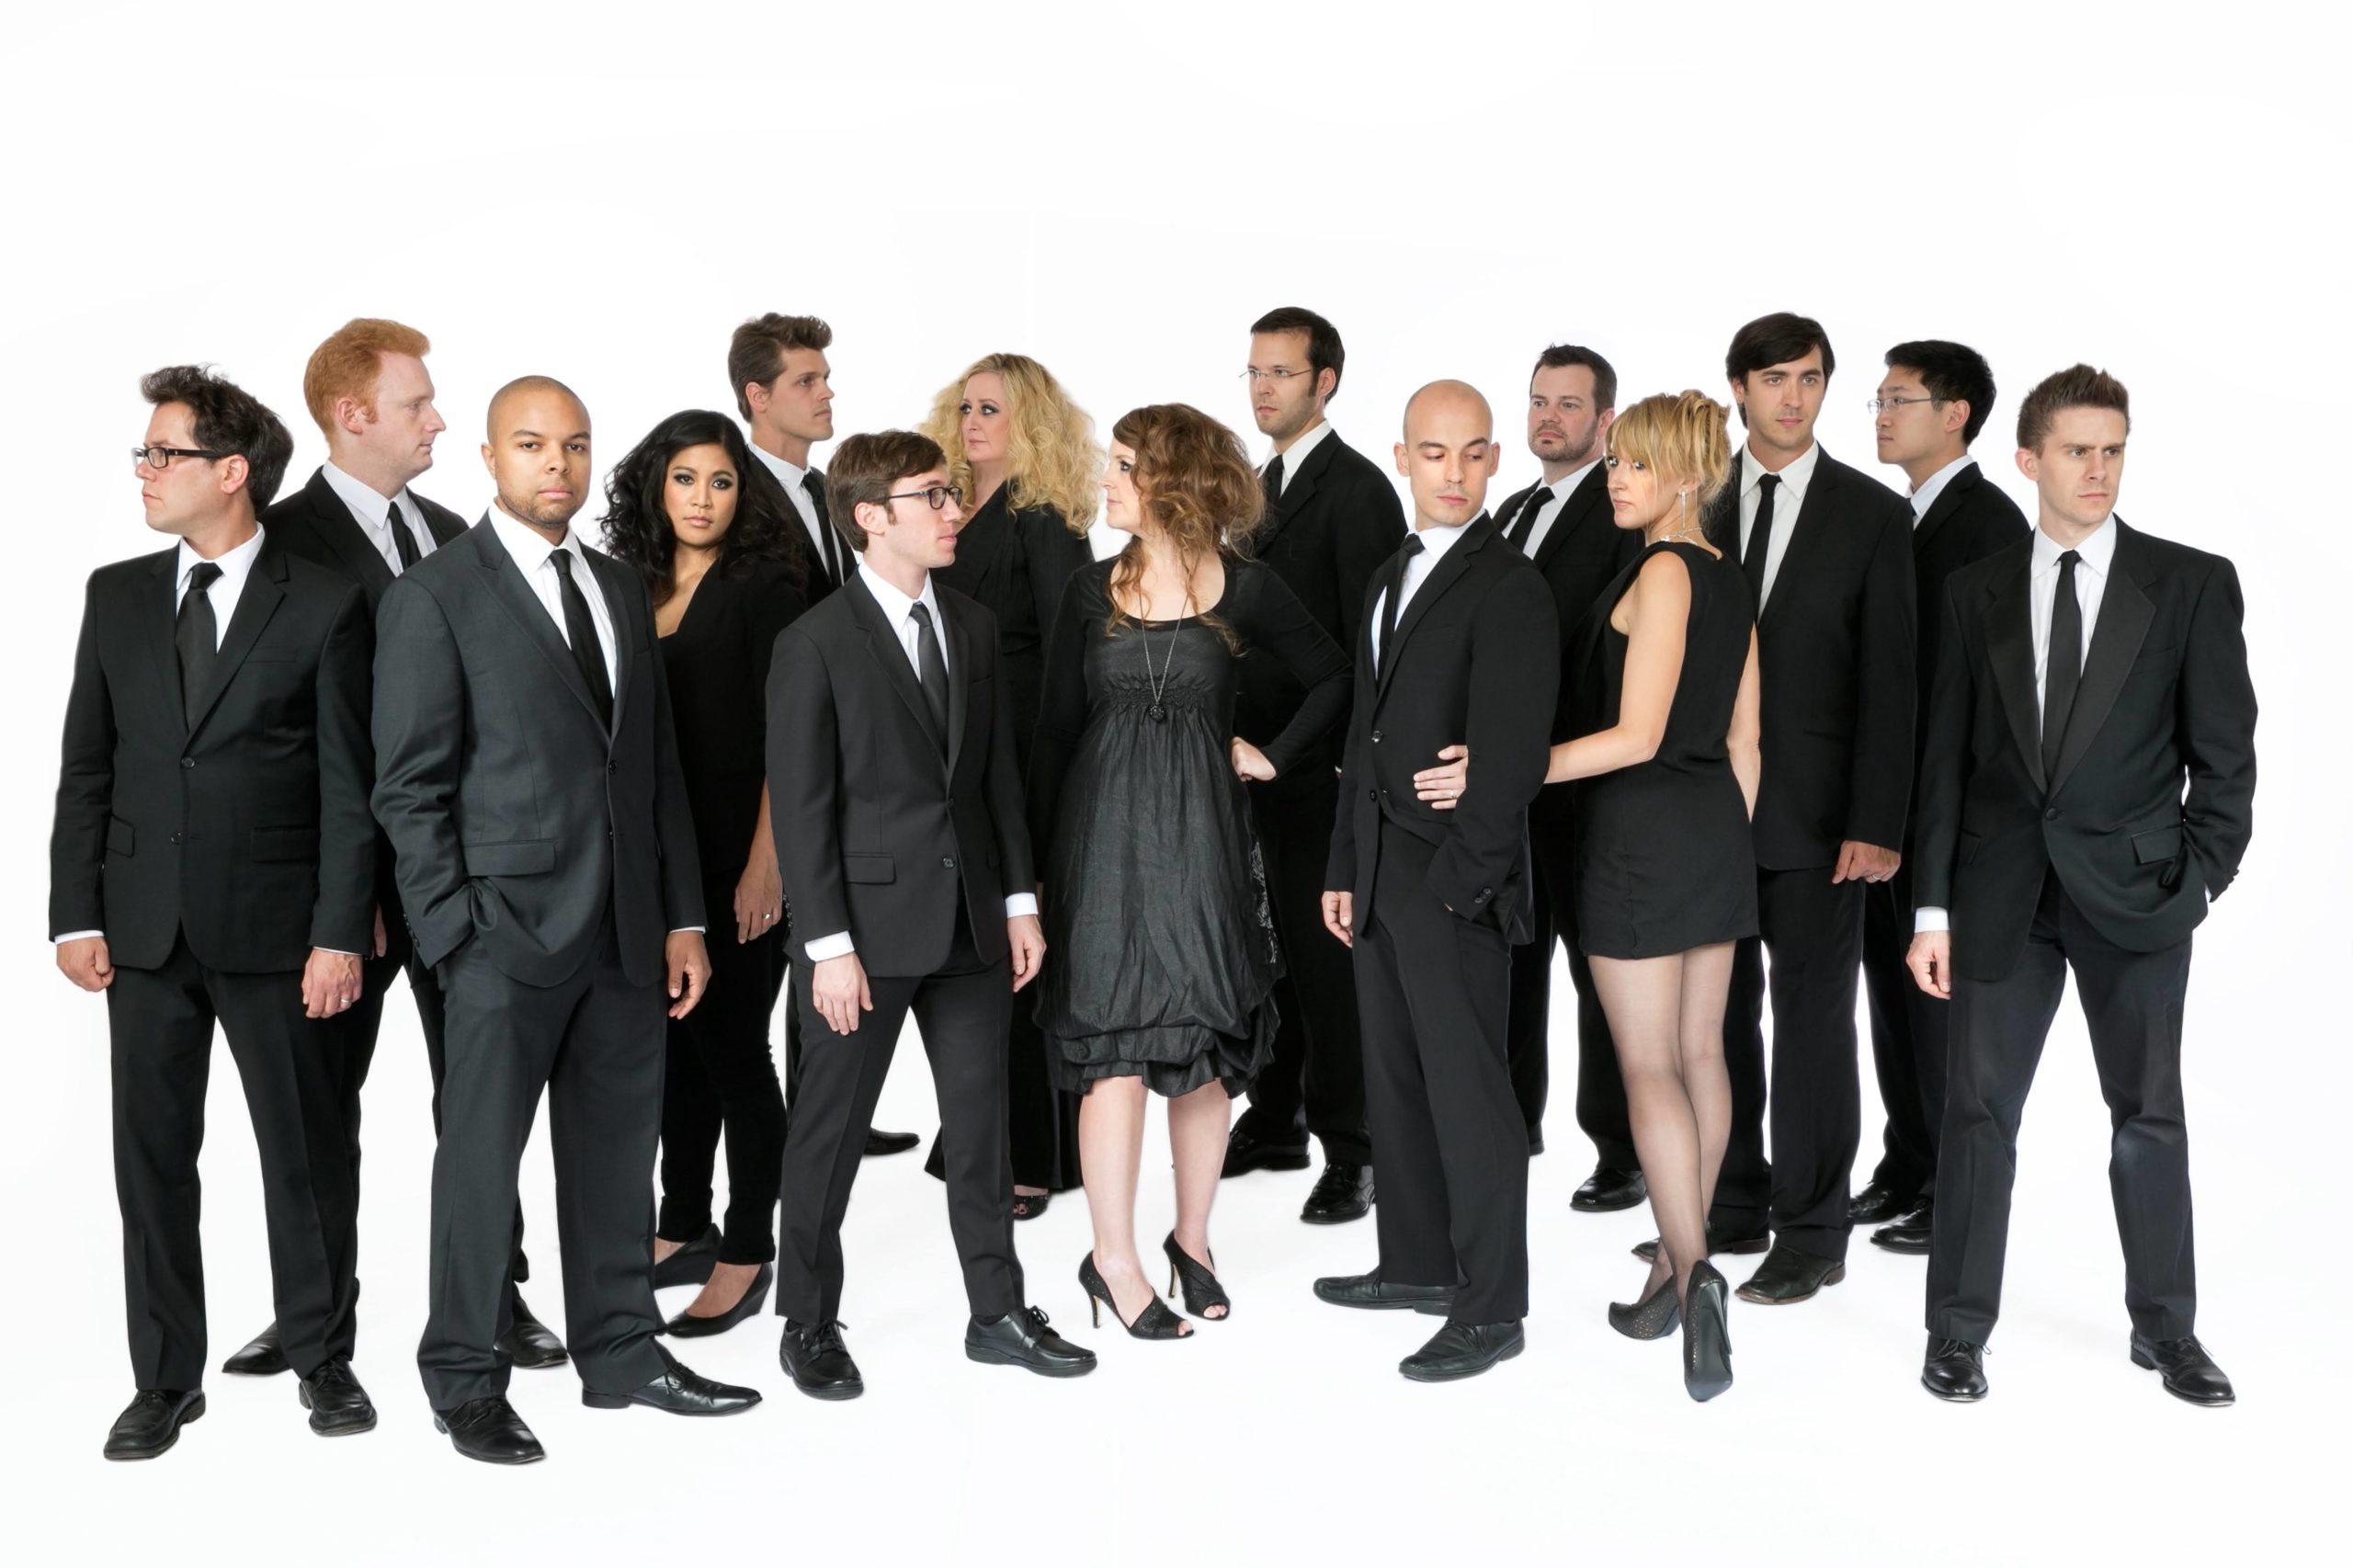 A group of people in black suits and dresses stand looking at one another.